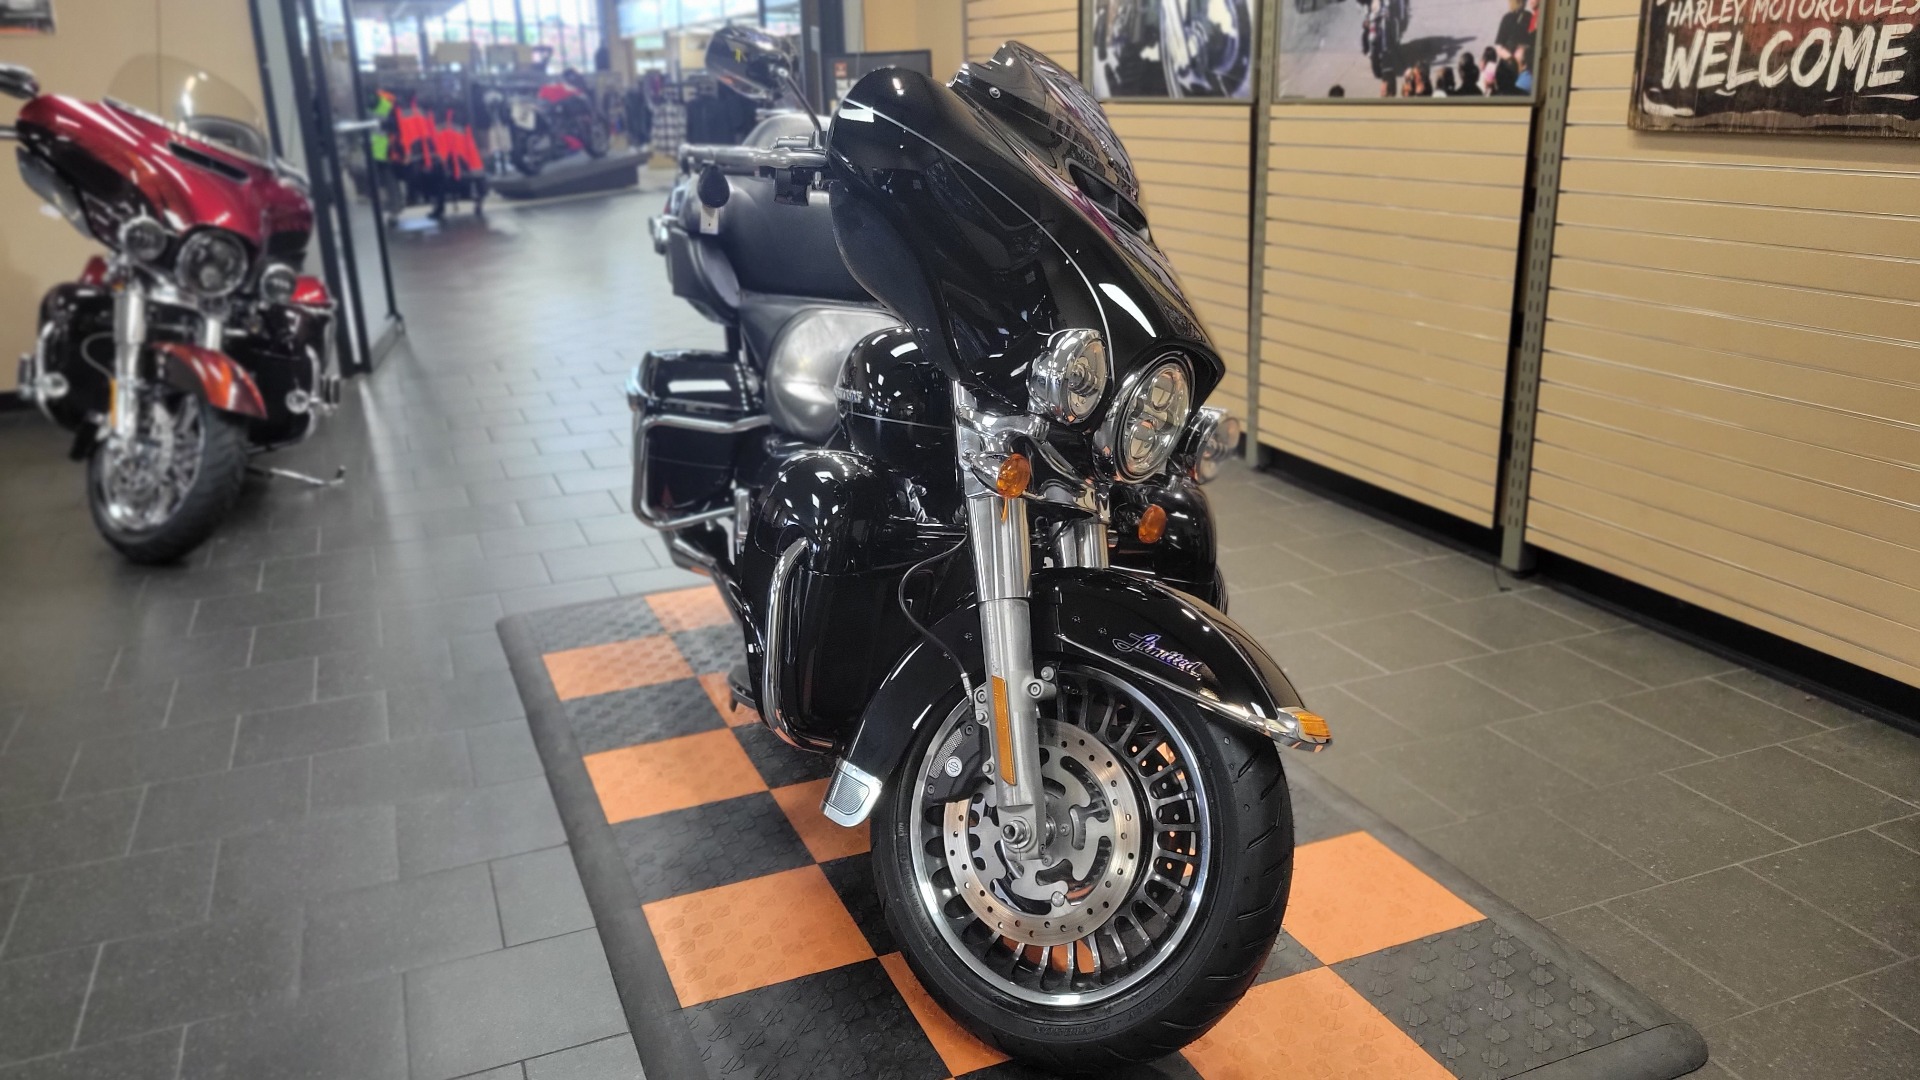 2015 Harley-Davidson Ultra Limited Low in The Woodlands, Texas - Photo 2